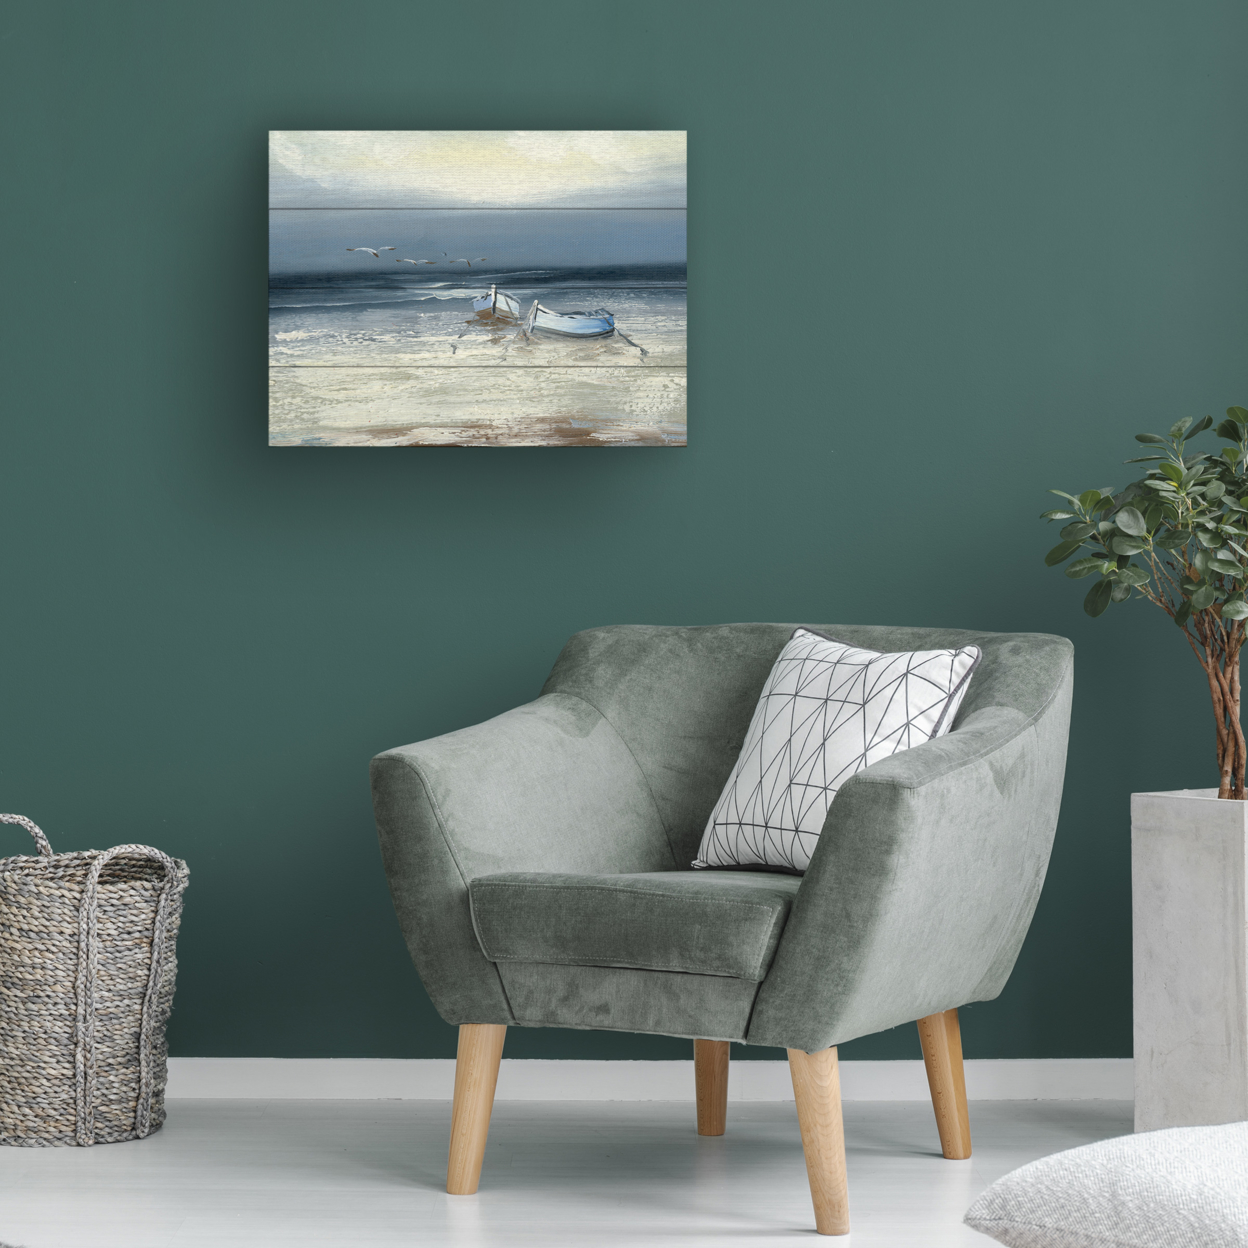 Wall Art 12 X 16 Inches Titled Low Tide Ready To Hang Printed On Wooden Planks